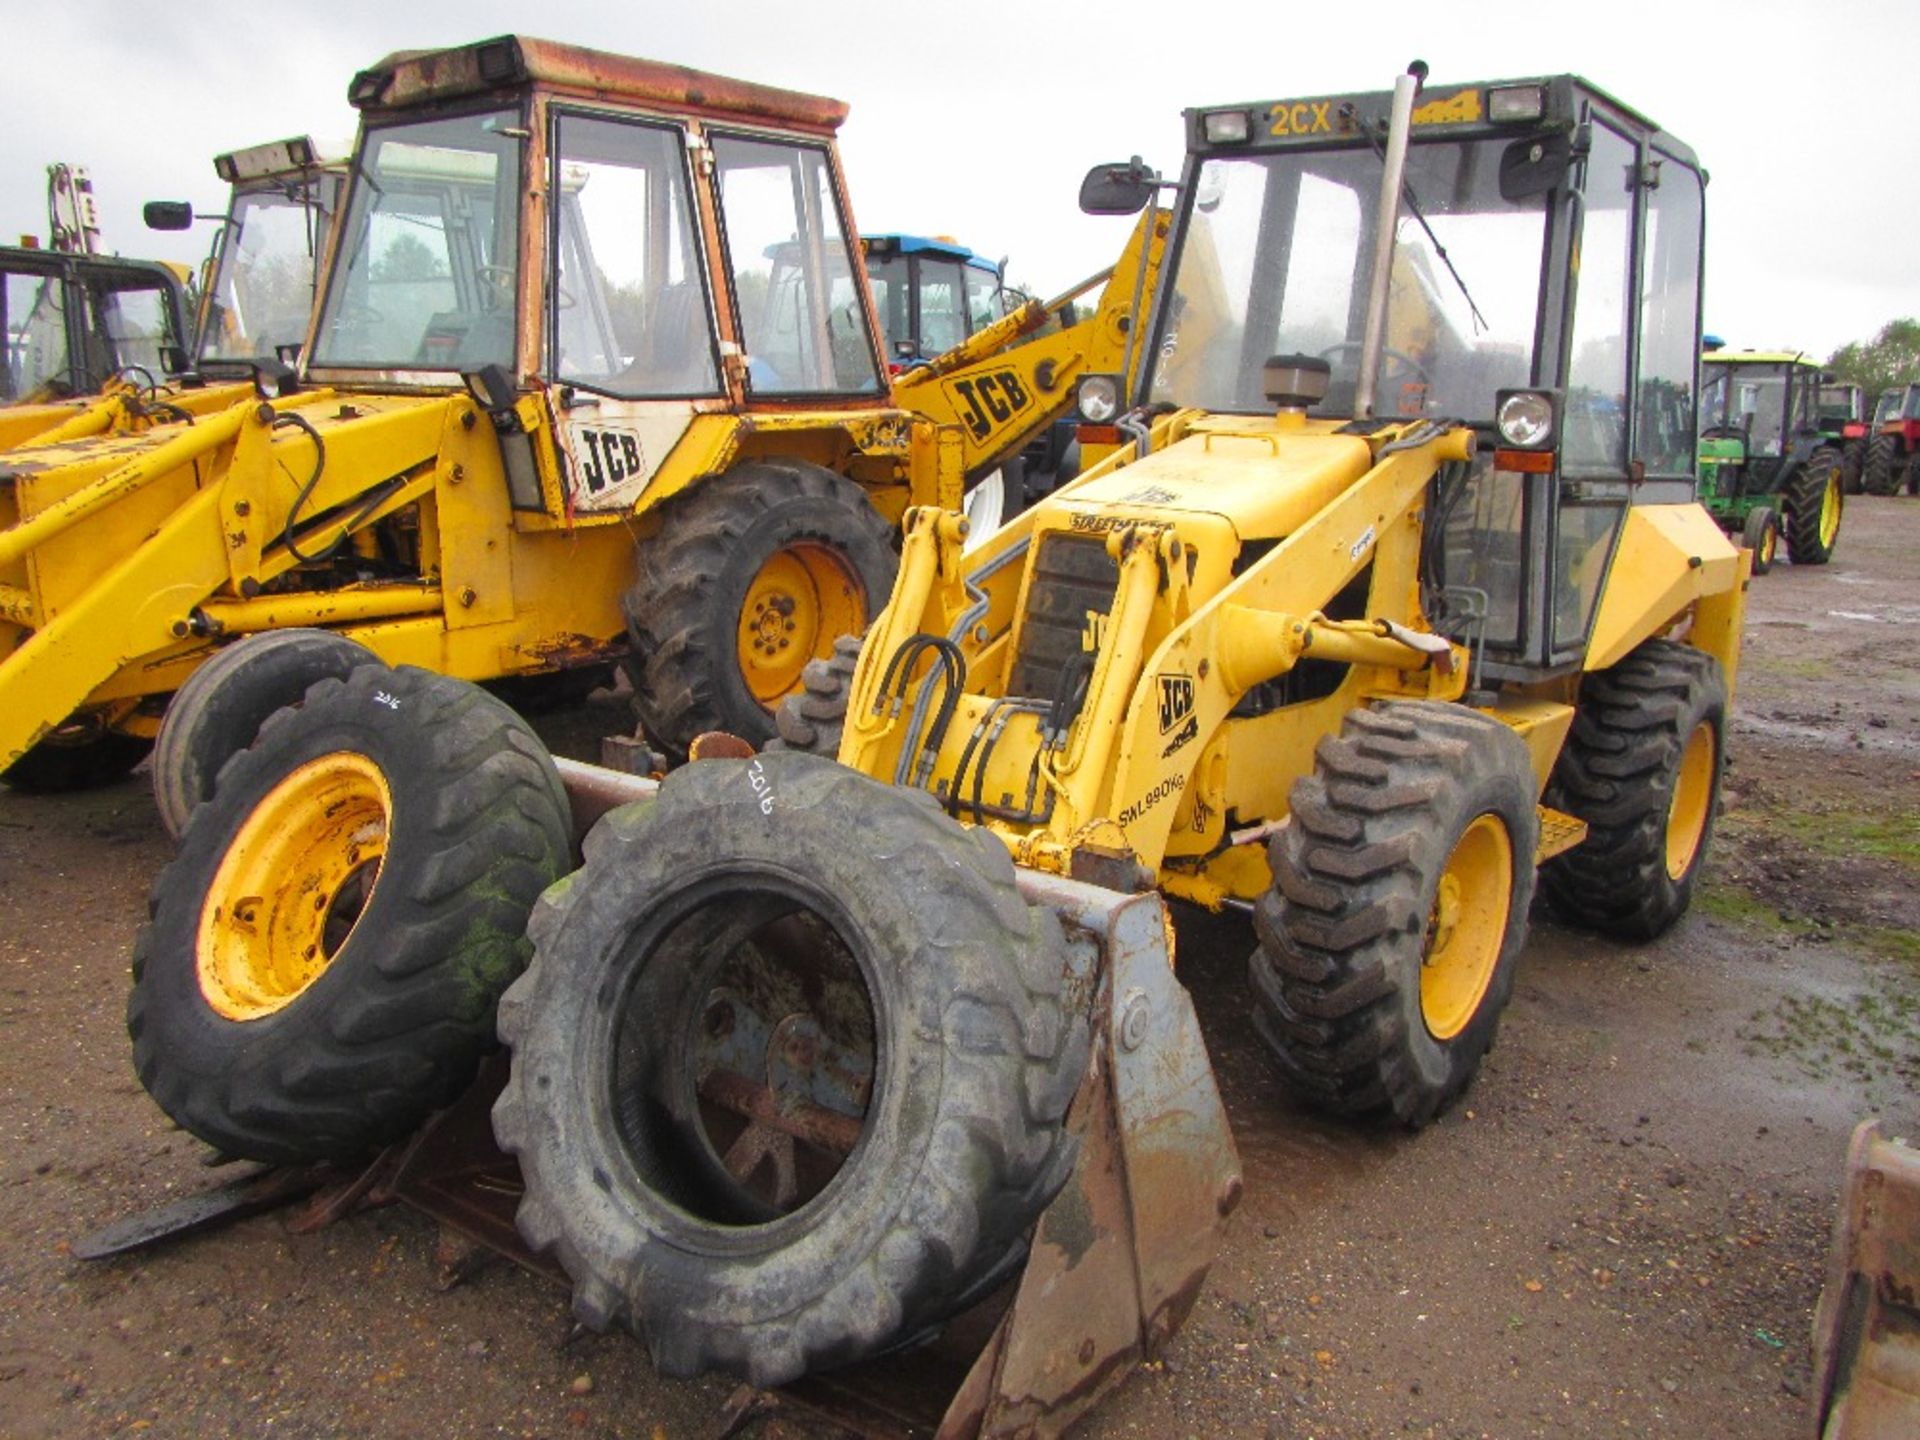 1991/1992 JCB 2CX Digger Loader. Quick Fit Pallet Forks, 2no. Trench Buckets, 1no. Ditching Bucket